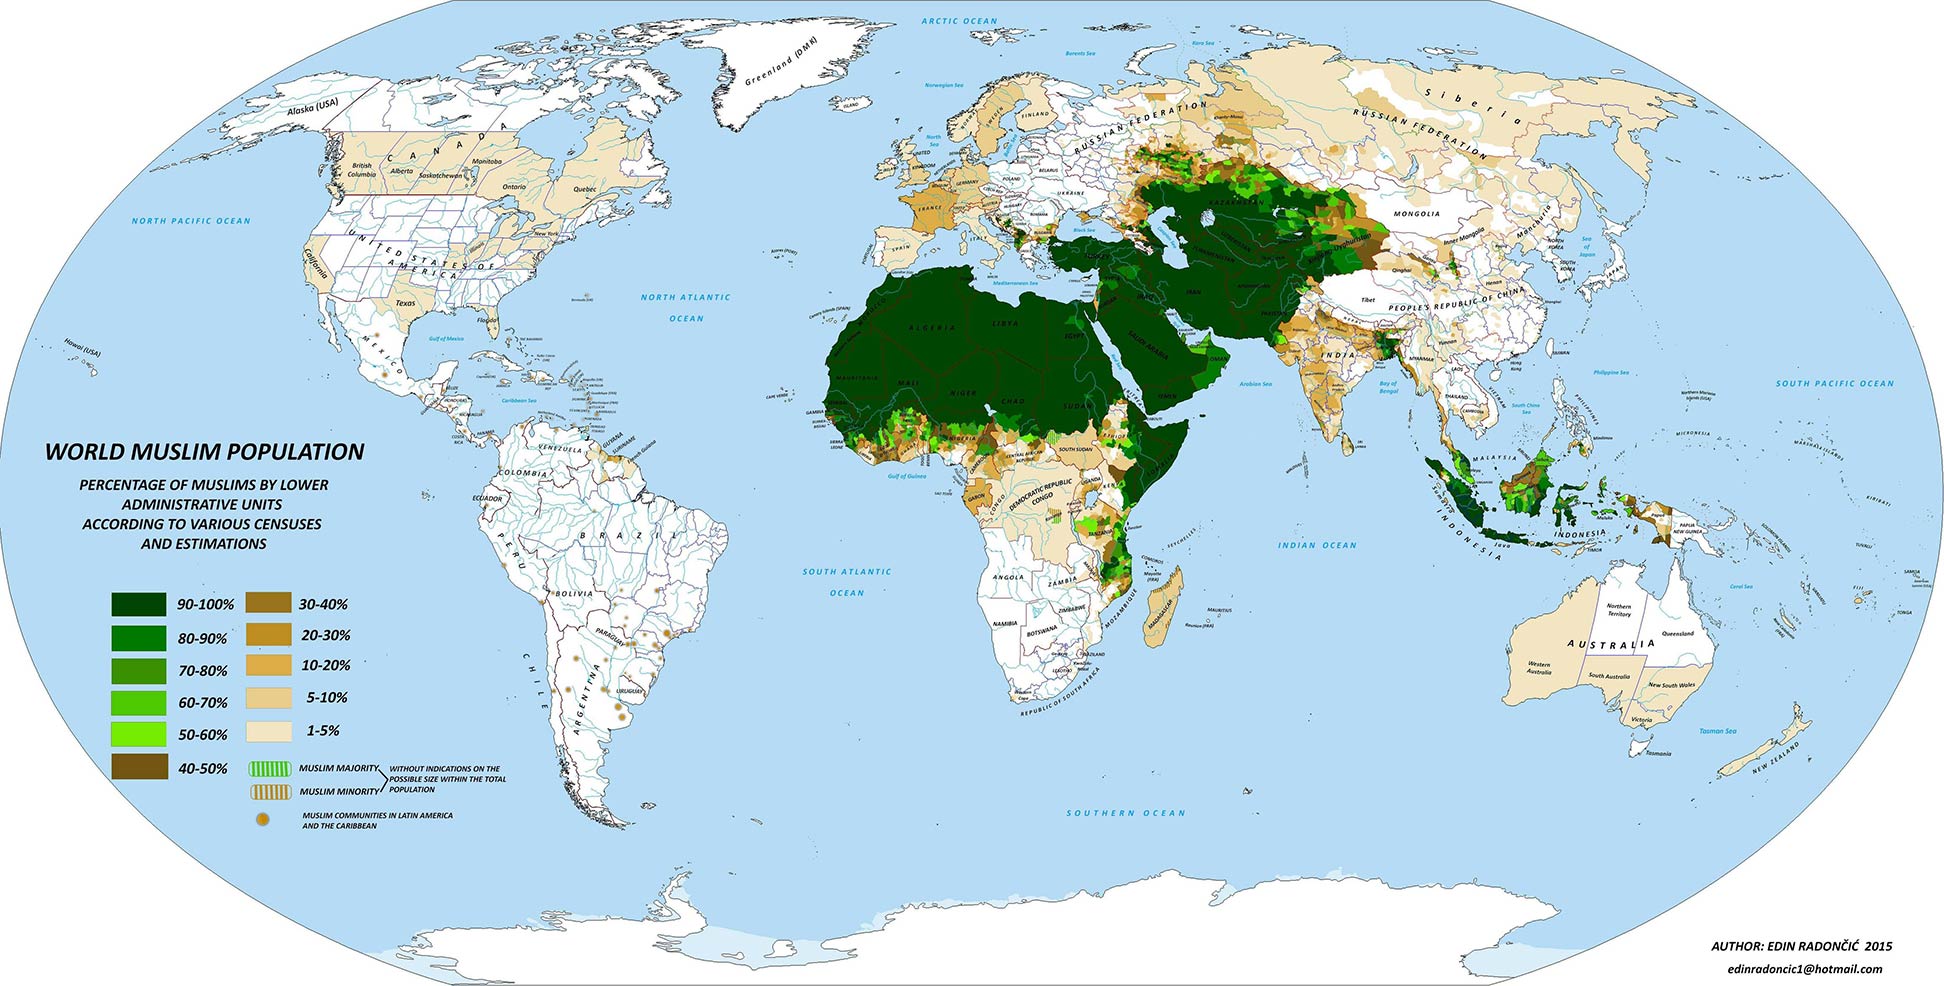 Map of the World Muslim Population by countries and administrative regions.